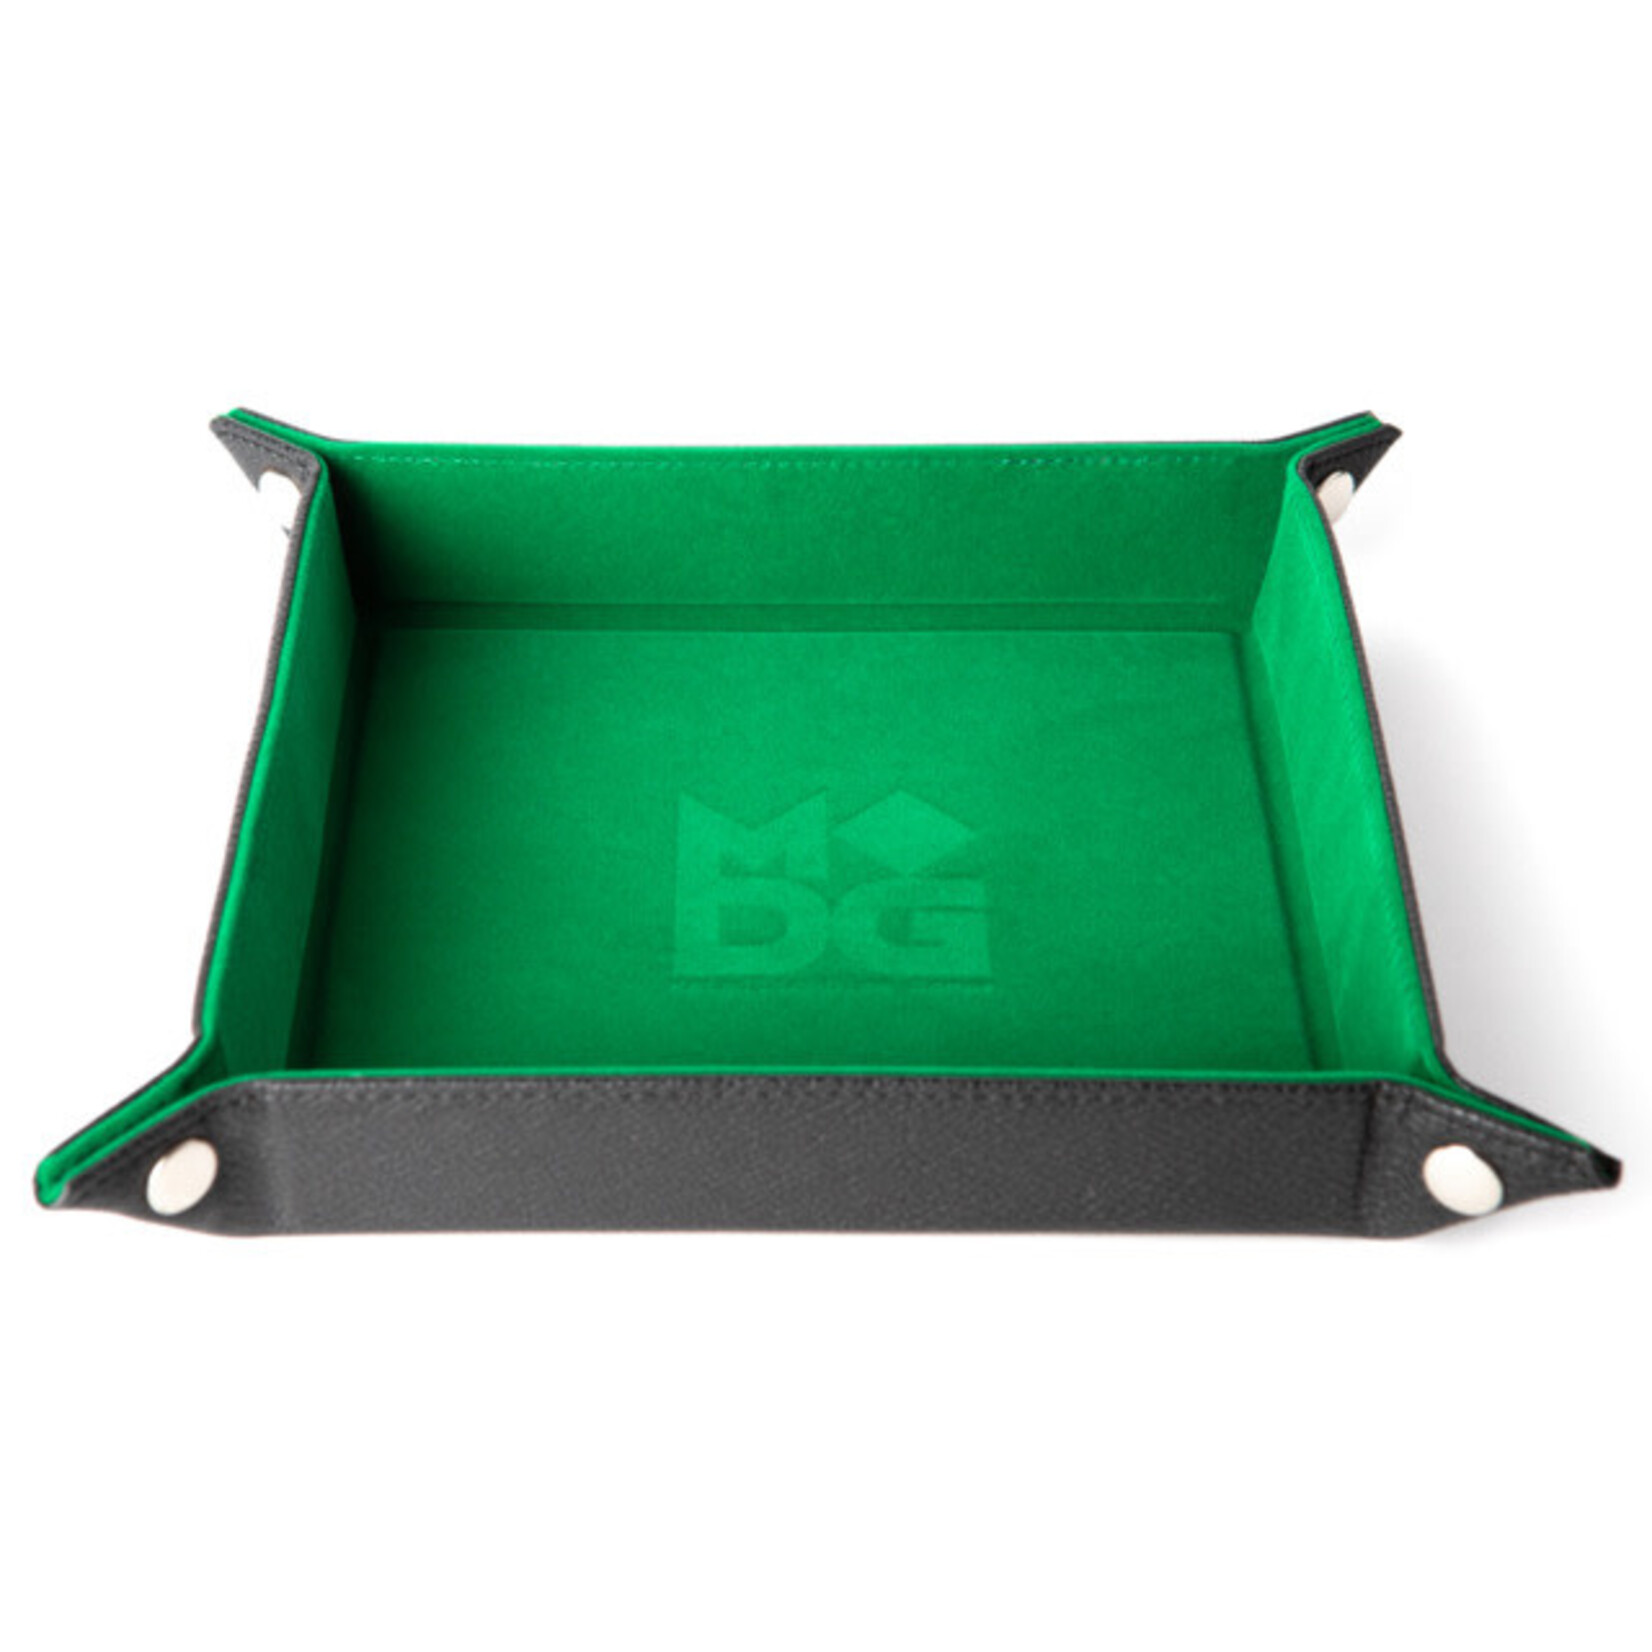 Metallic Dice Games Velvet Folding Dice Tray with Leather Backing: 10in x 10in Green